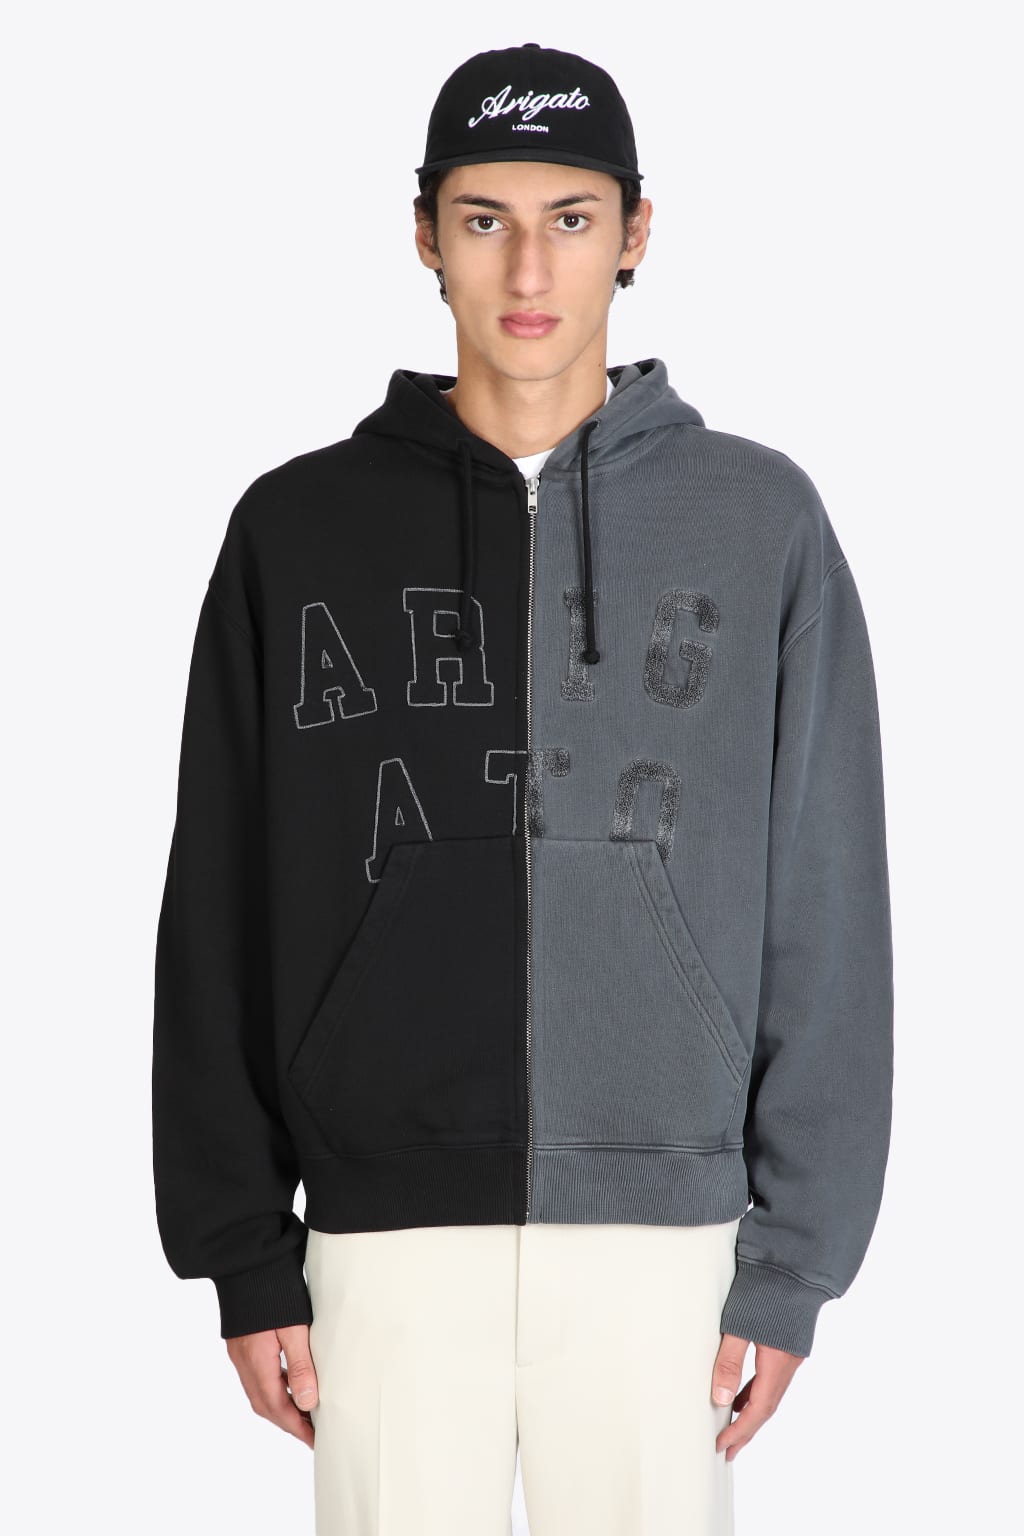 Axel Arigato Legend Zip Hoodie Washed grey and black split zip-up hoodie - Legend zip hoodie